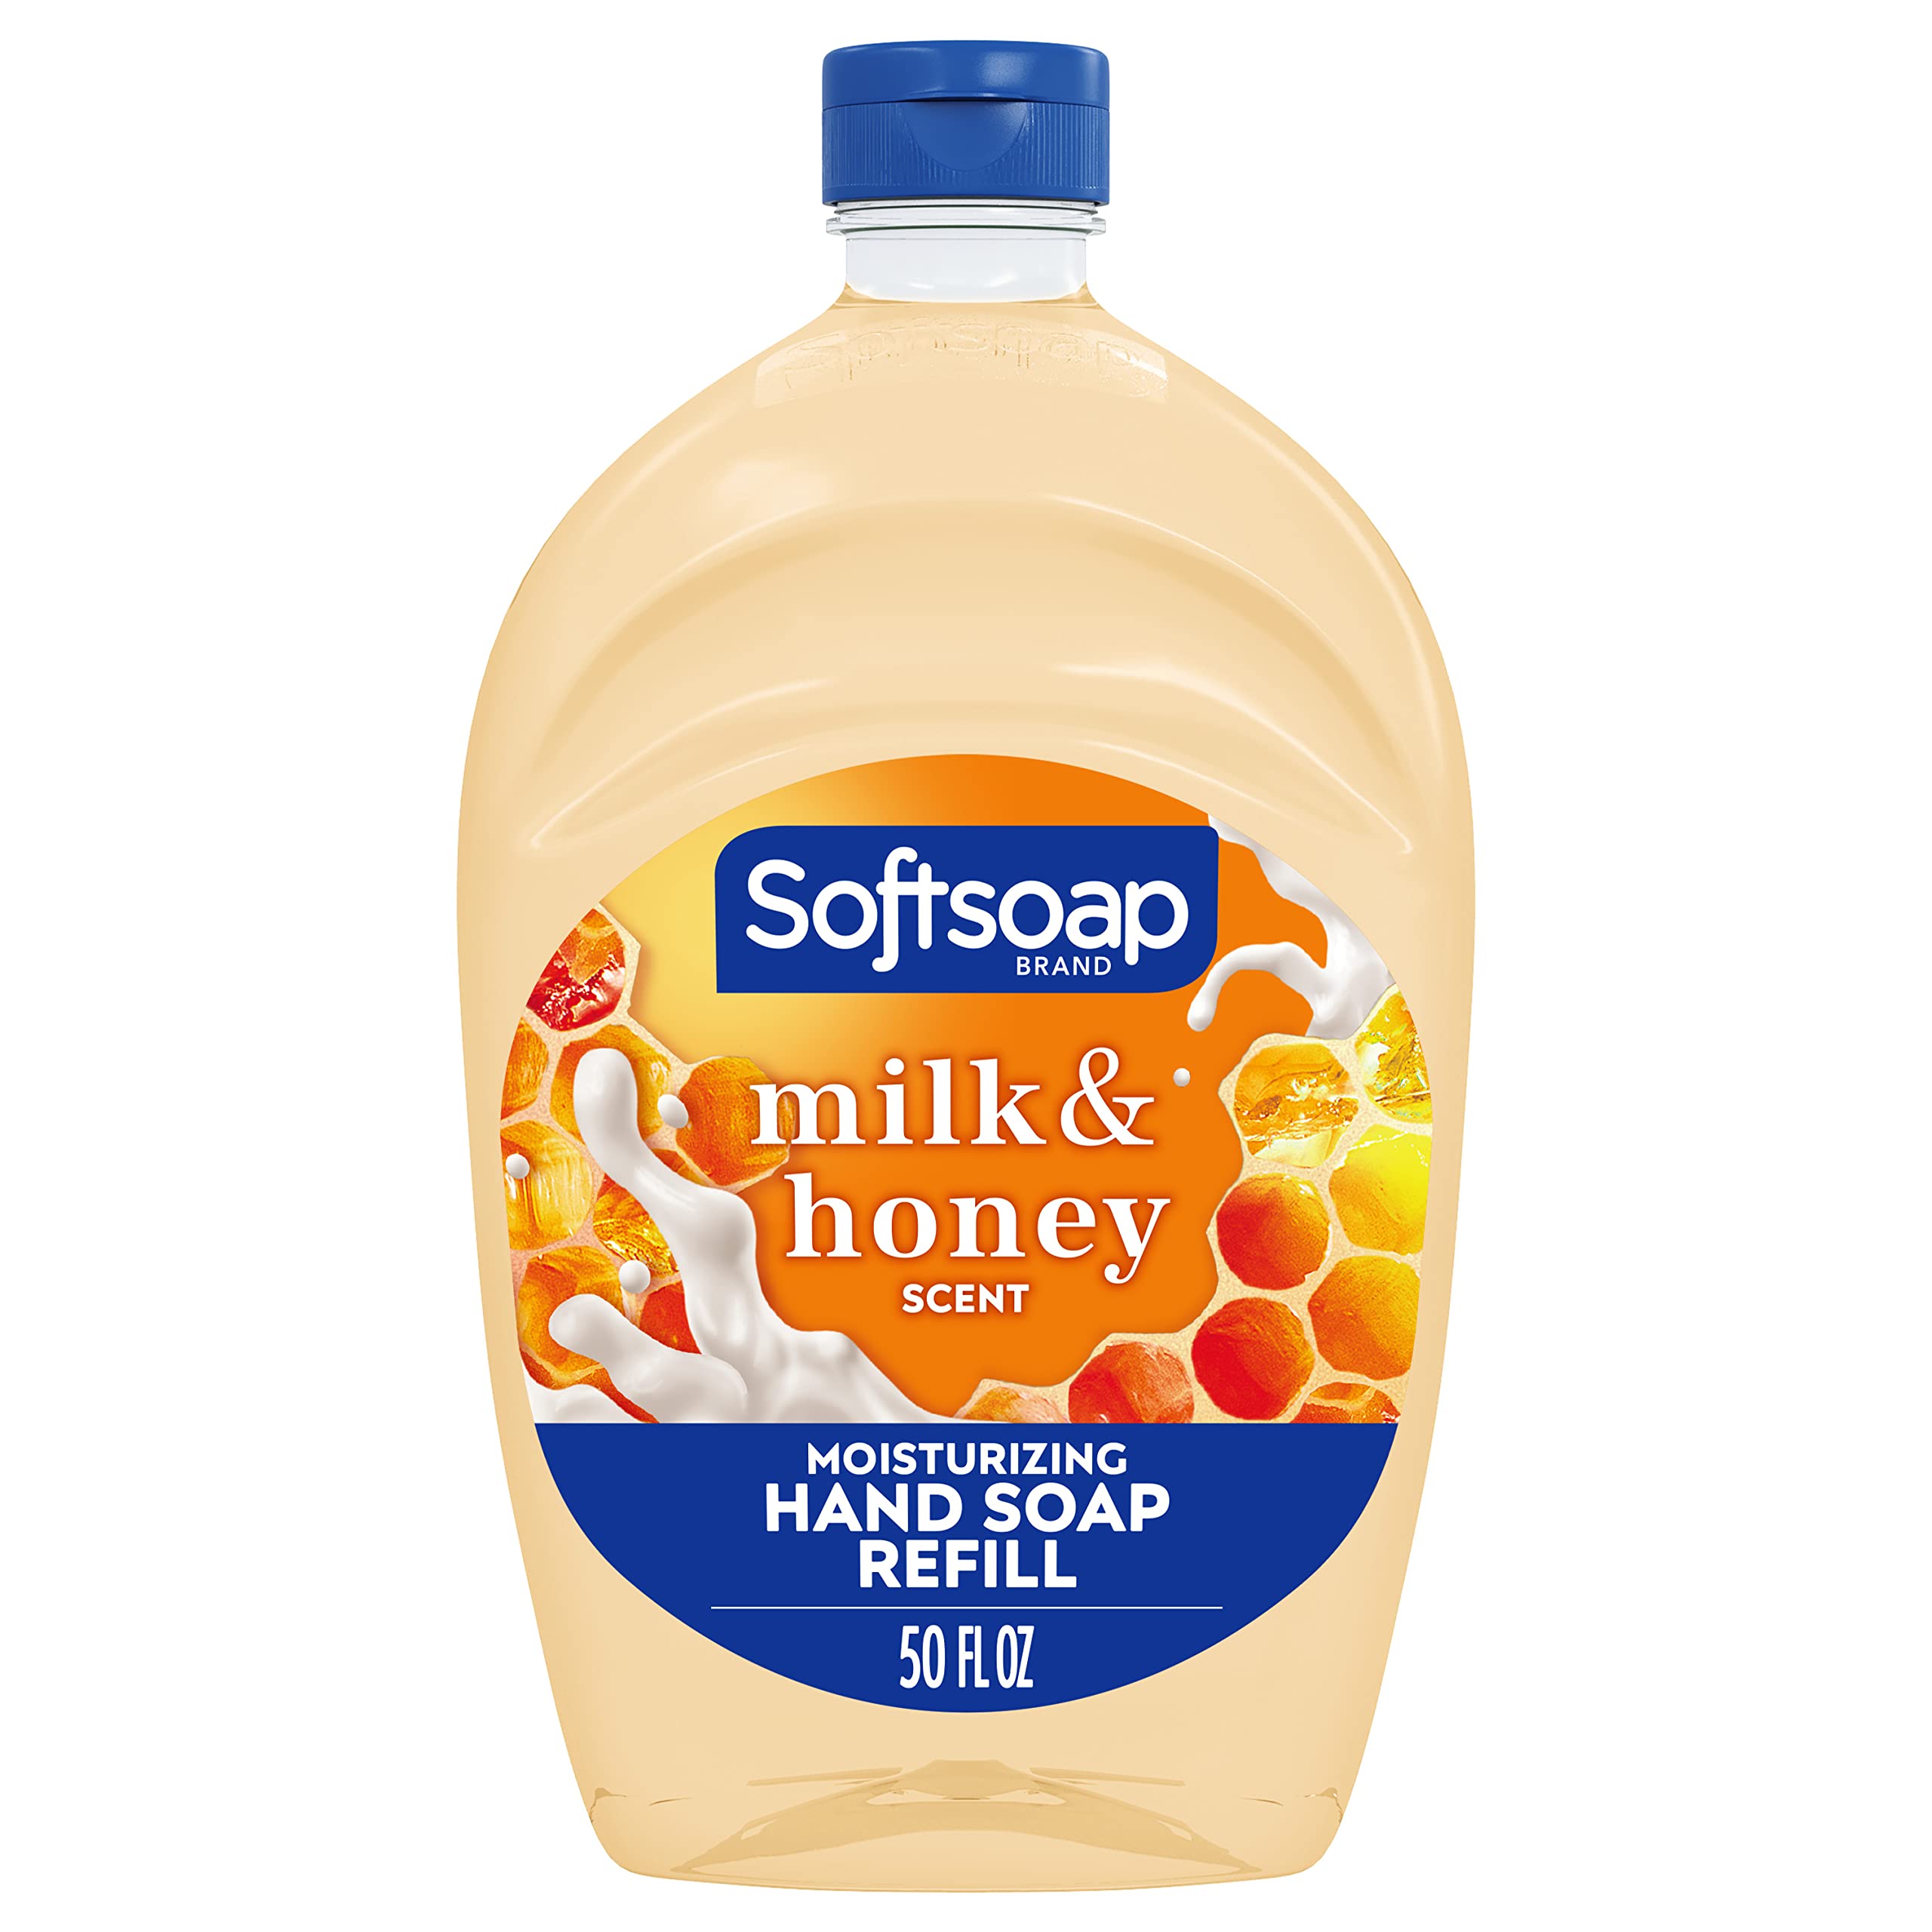 50-Oz Softsoap Liquid Hand Soap Refill (Milk & Honey) $4.32 + Free Shipping w/ Prime or on orders over $25